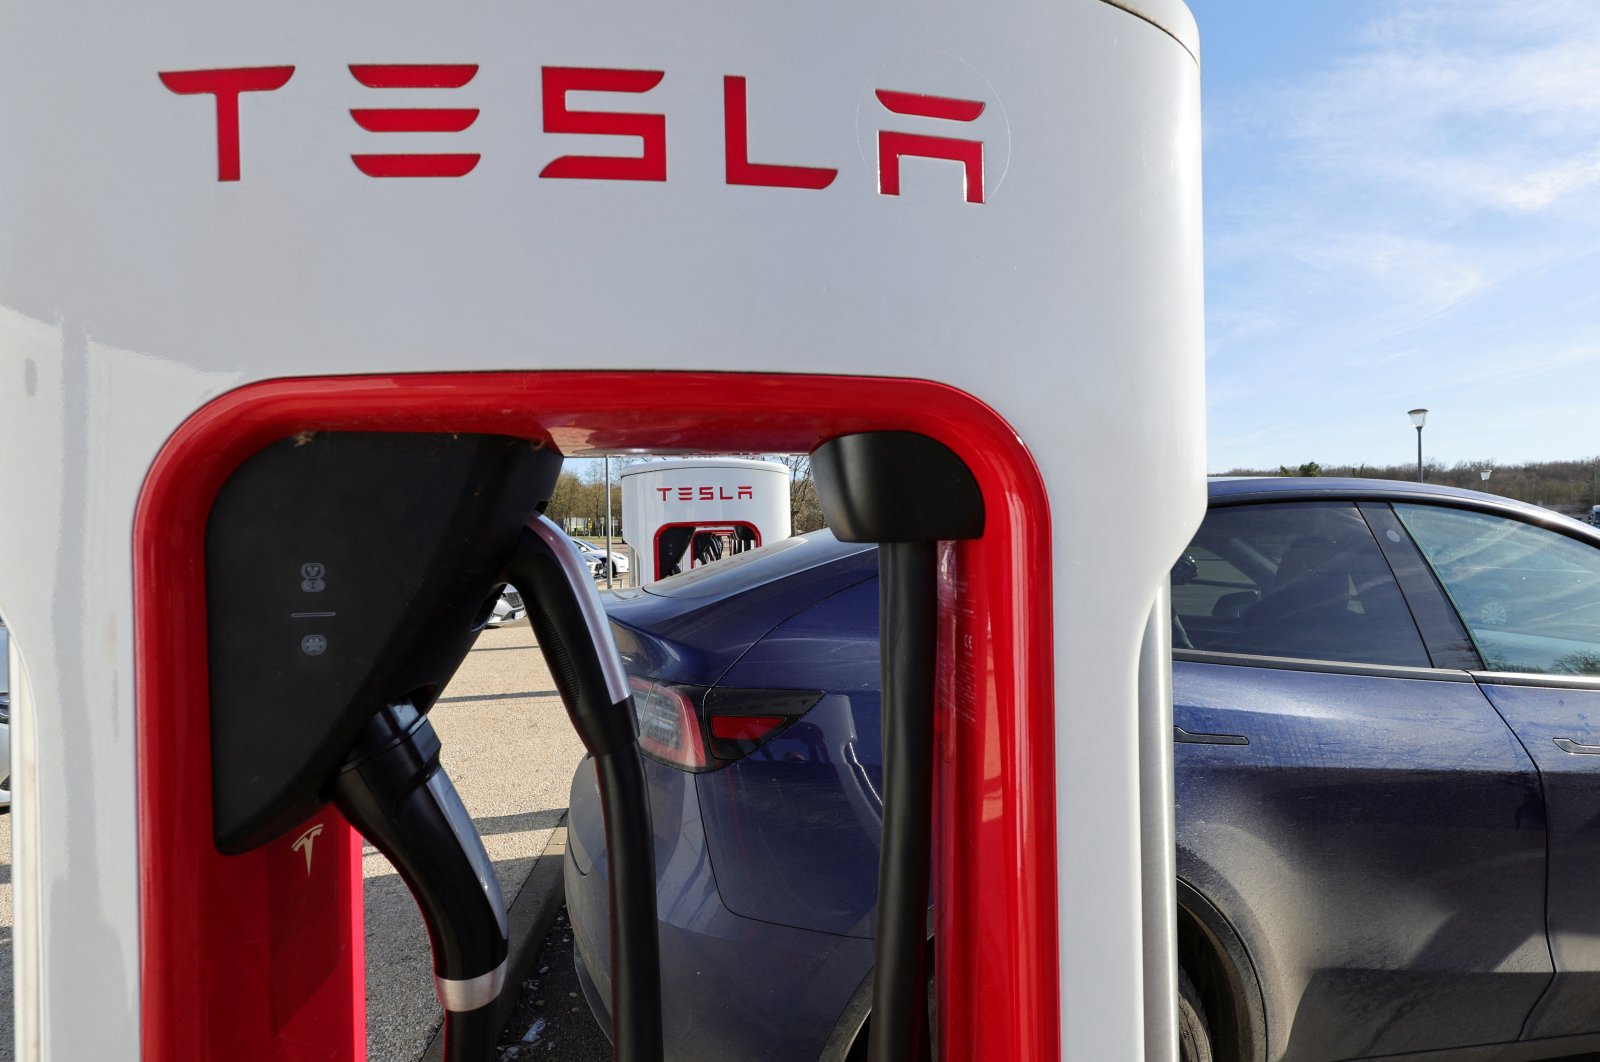 A driver recharges the battery of his Tesla car, at a Tesla Super Charging station, in a petrol station on the highway in Chateauvillain, France, February 20, 2023. (Reuters photo)